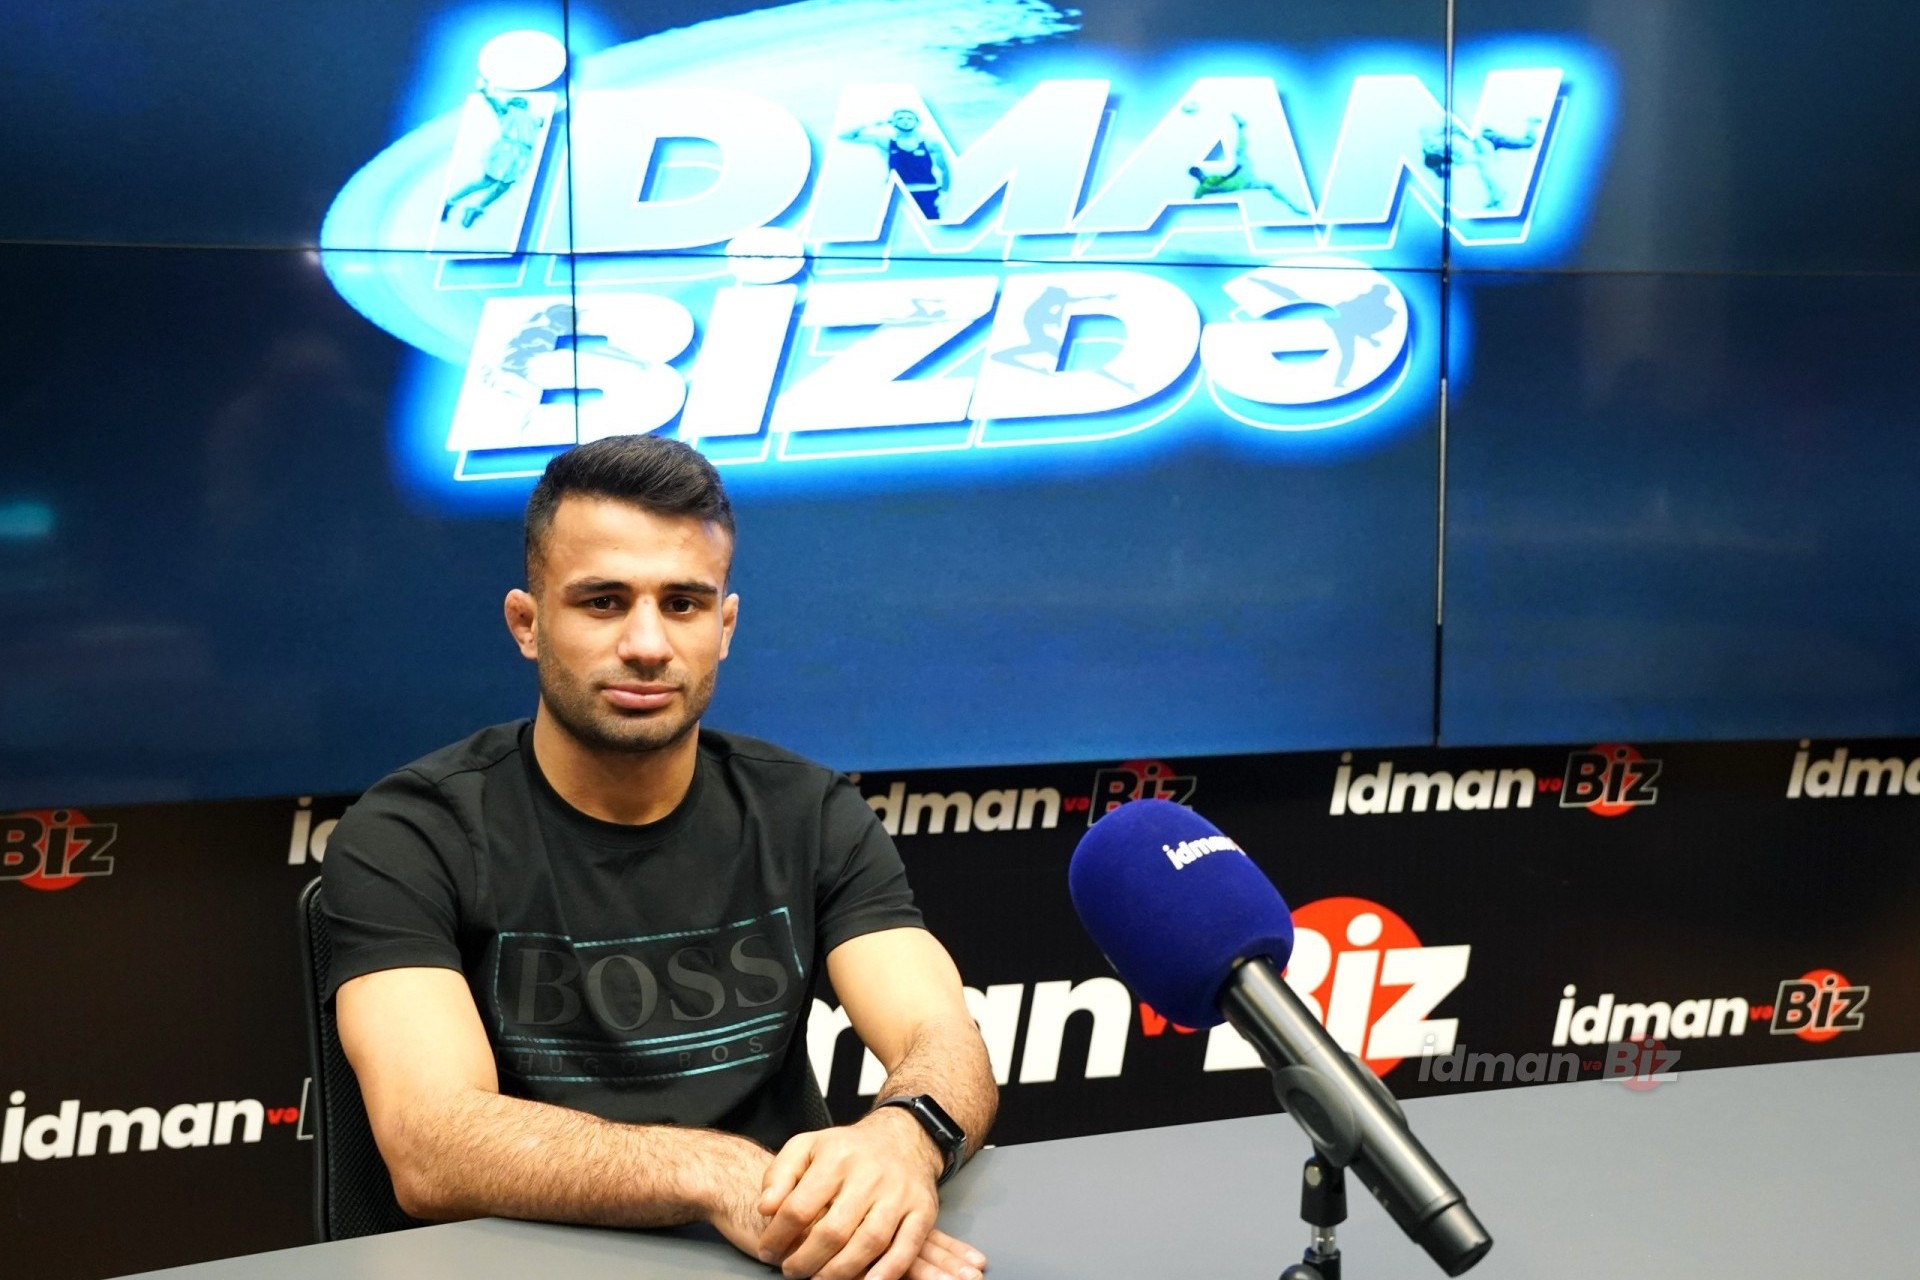 Support  from Aliabbas Rzazade to Turan: "Let them see who is being helped" - VIDEO